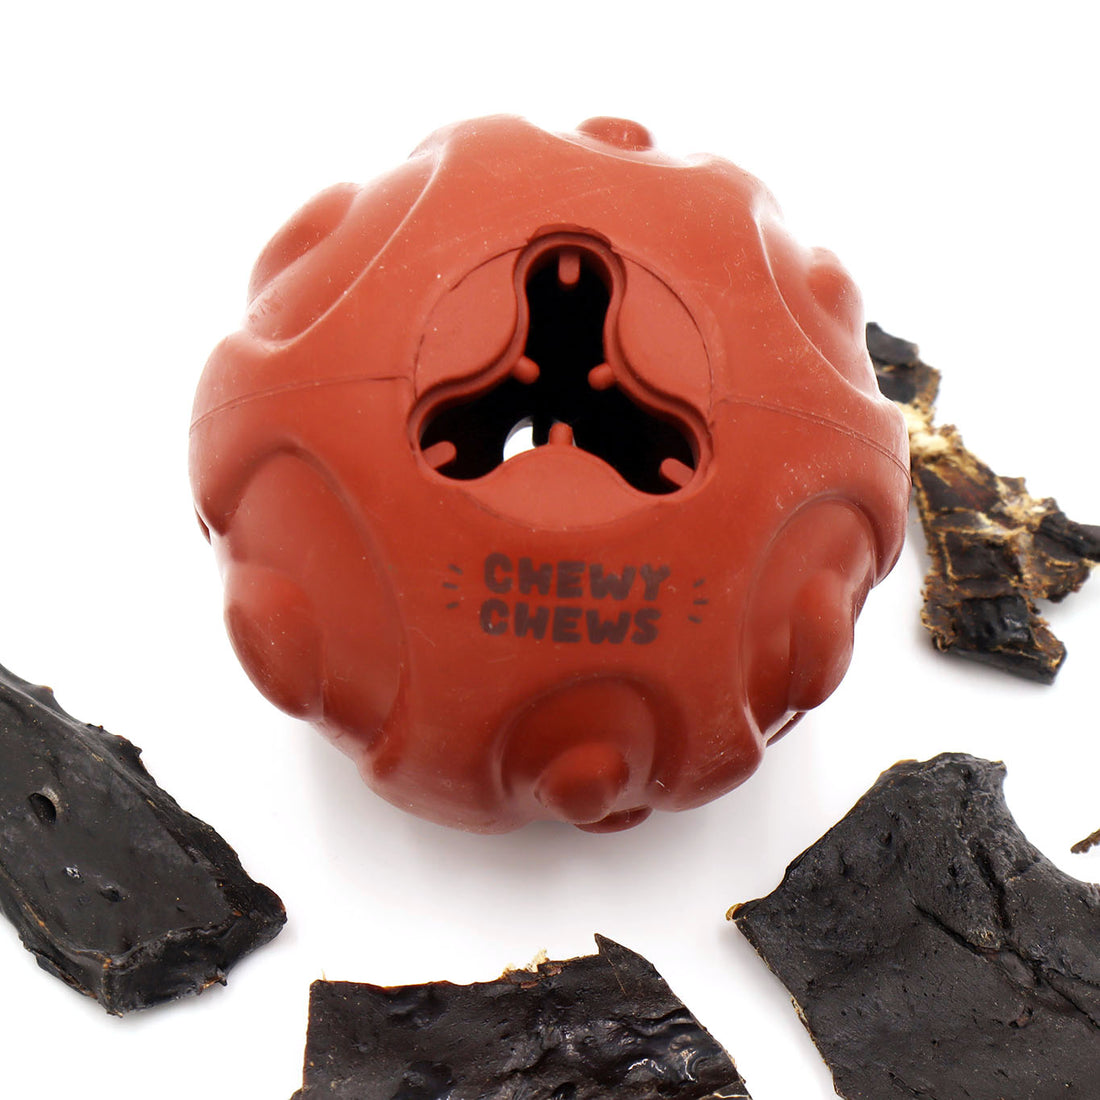 Chewy Chews "Treat-n-play" Rubber Ball